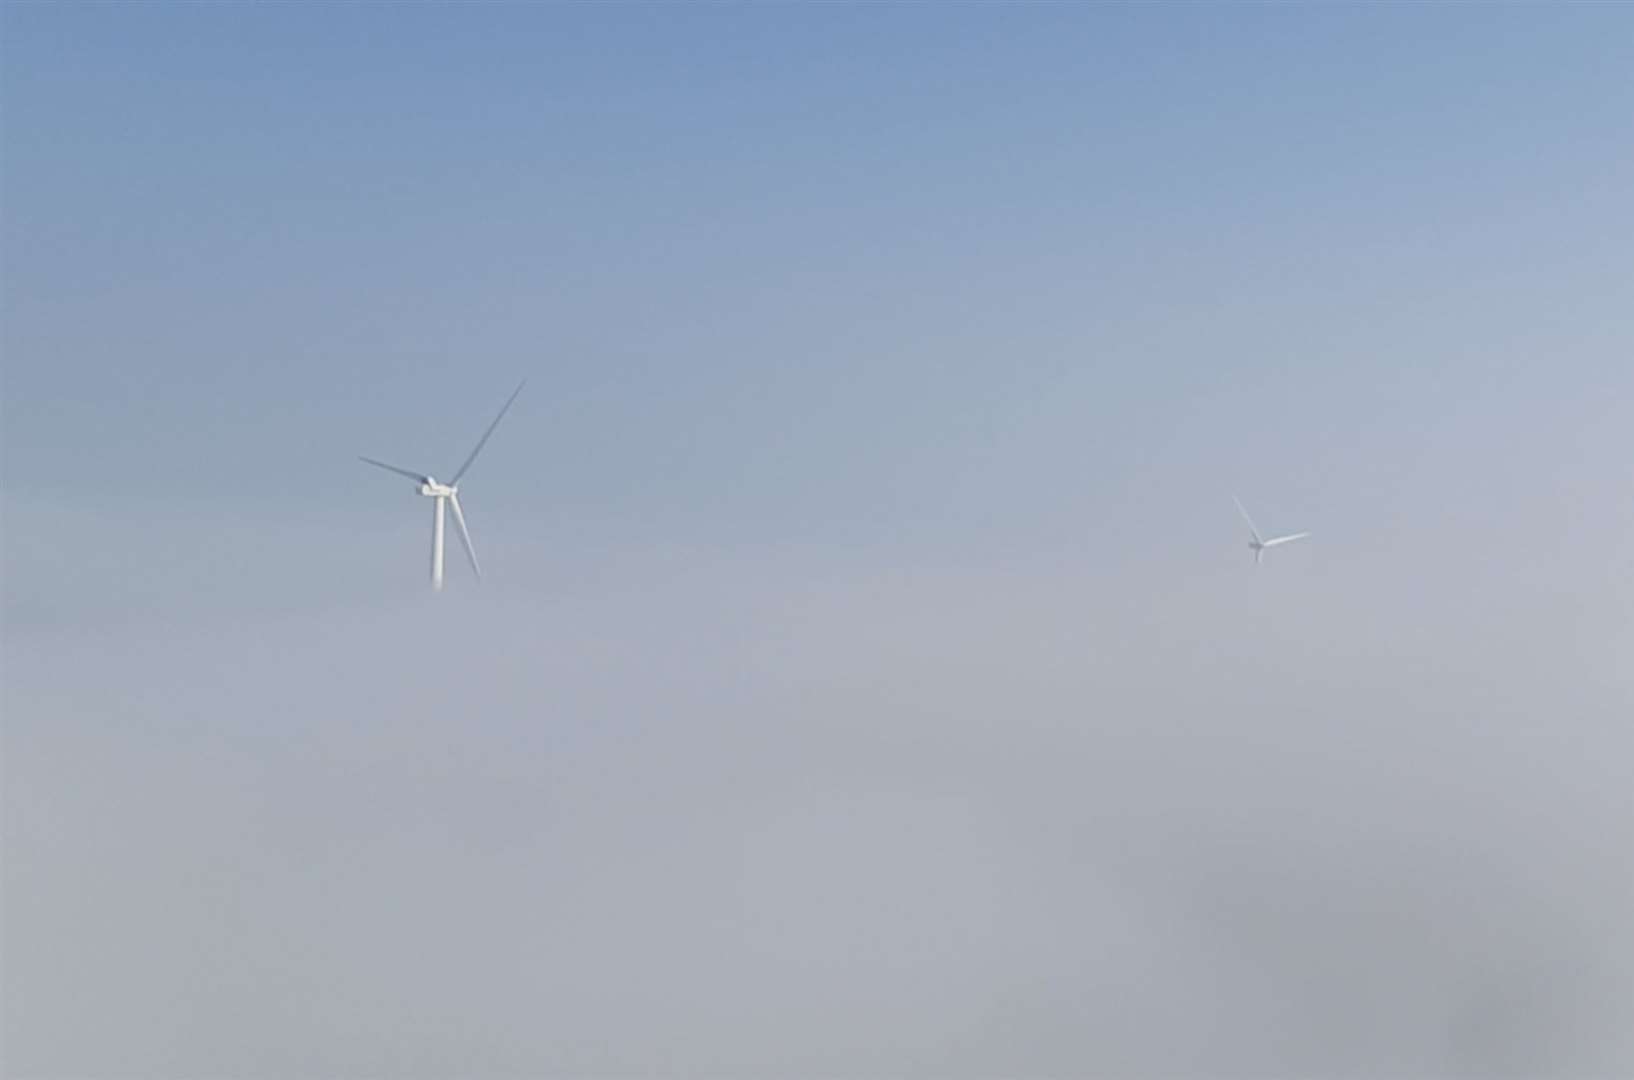 On a foggy day the technicians can only see the tops of the turbines.